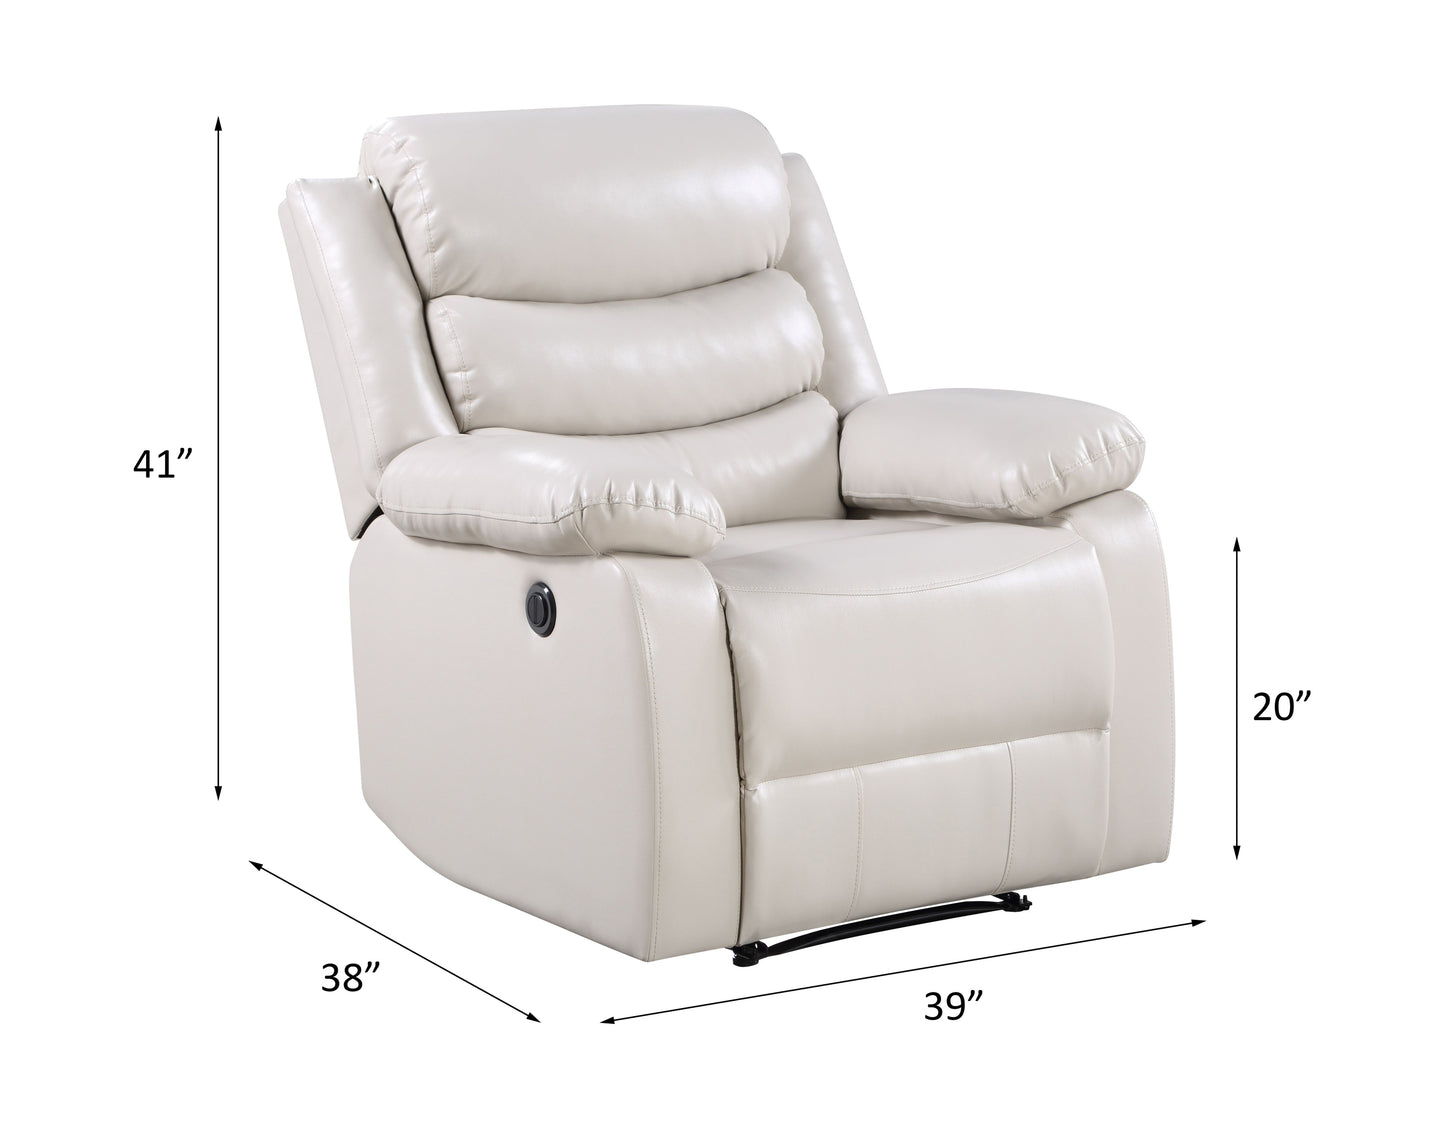 Eilbra Power Recliner in Beige Faux Leather - Ultimate Relaxation Recliner